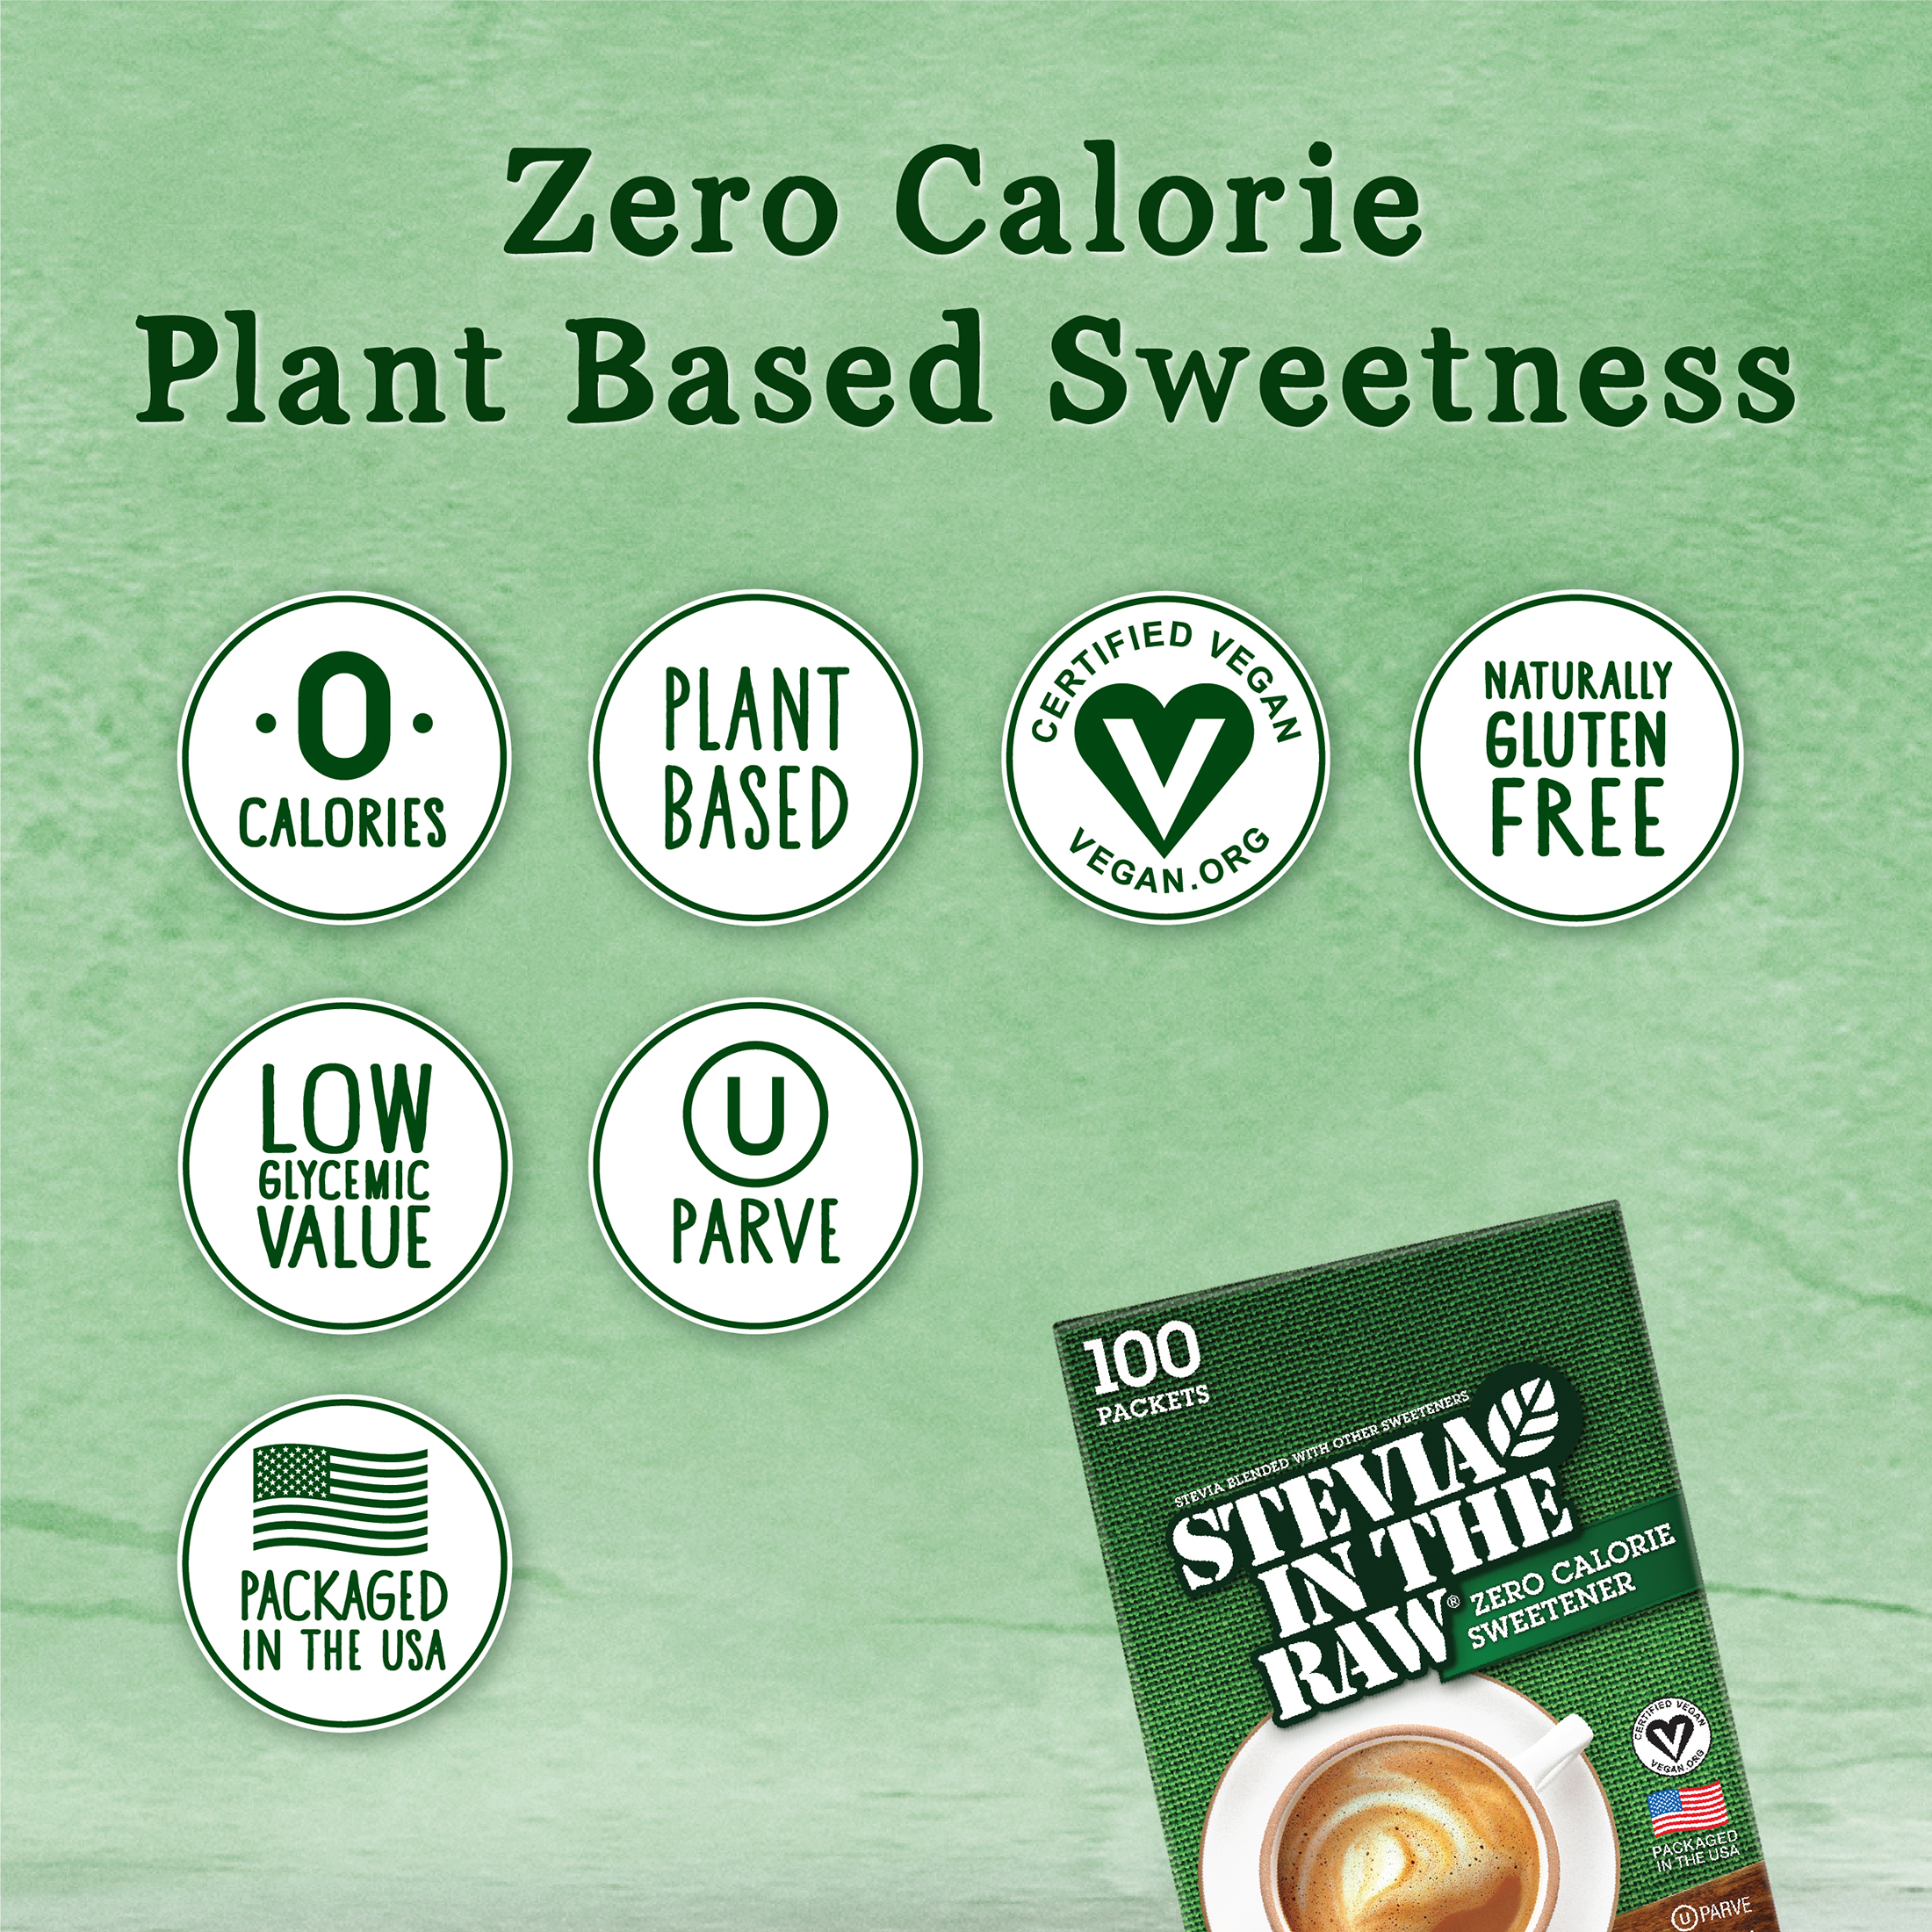 Stevia In The Raw Zero Calorie Sweetener, 100 count, 3.5 oz - image 3 of 9